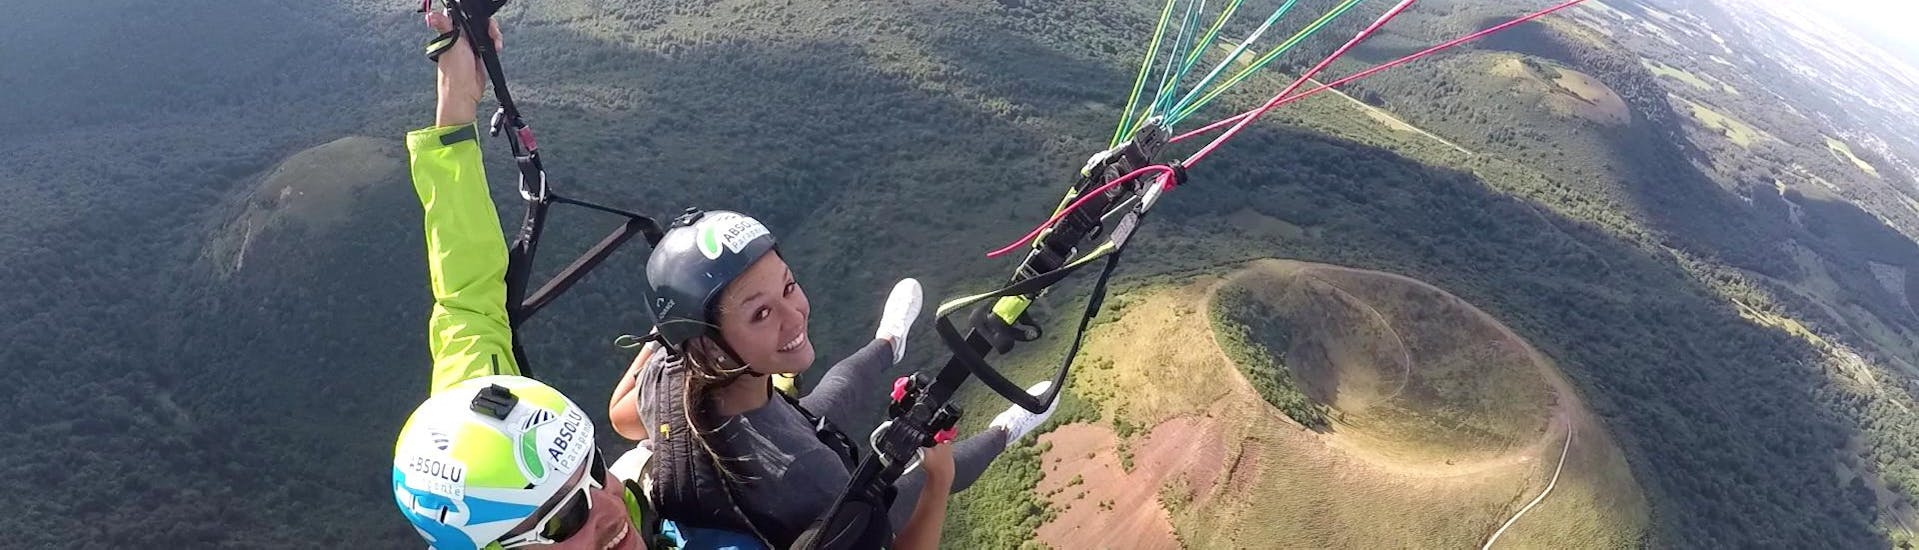 A paragliding enthusiast is happy to do a tandem paragliding flight with an experienced pilot from Absolu Parapente above the Puy de Dôme and the volcanoes of the Chaîne des Puys.